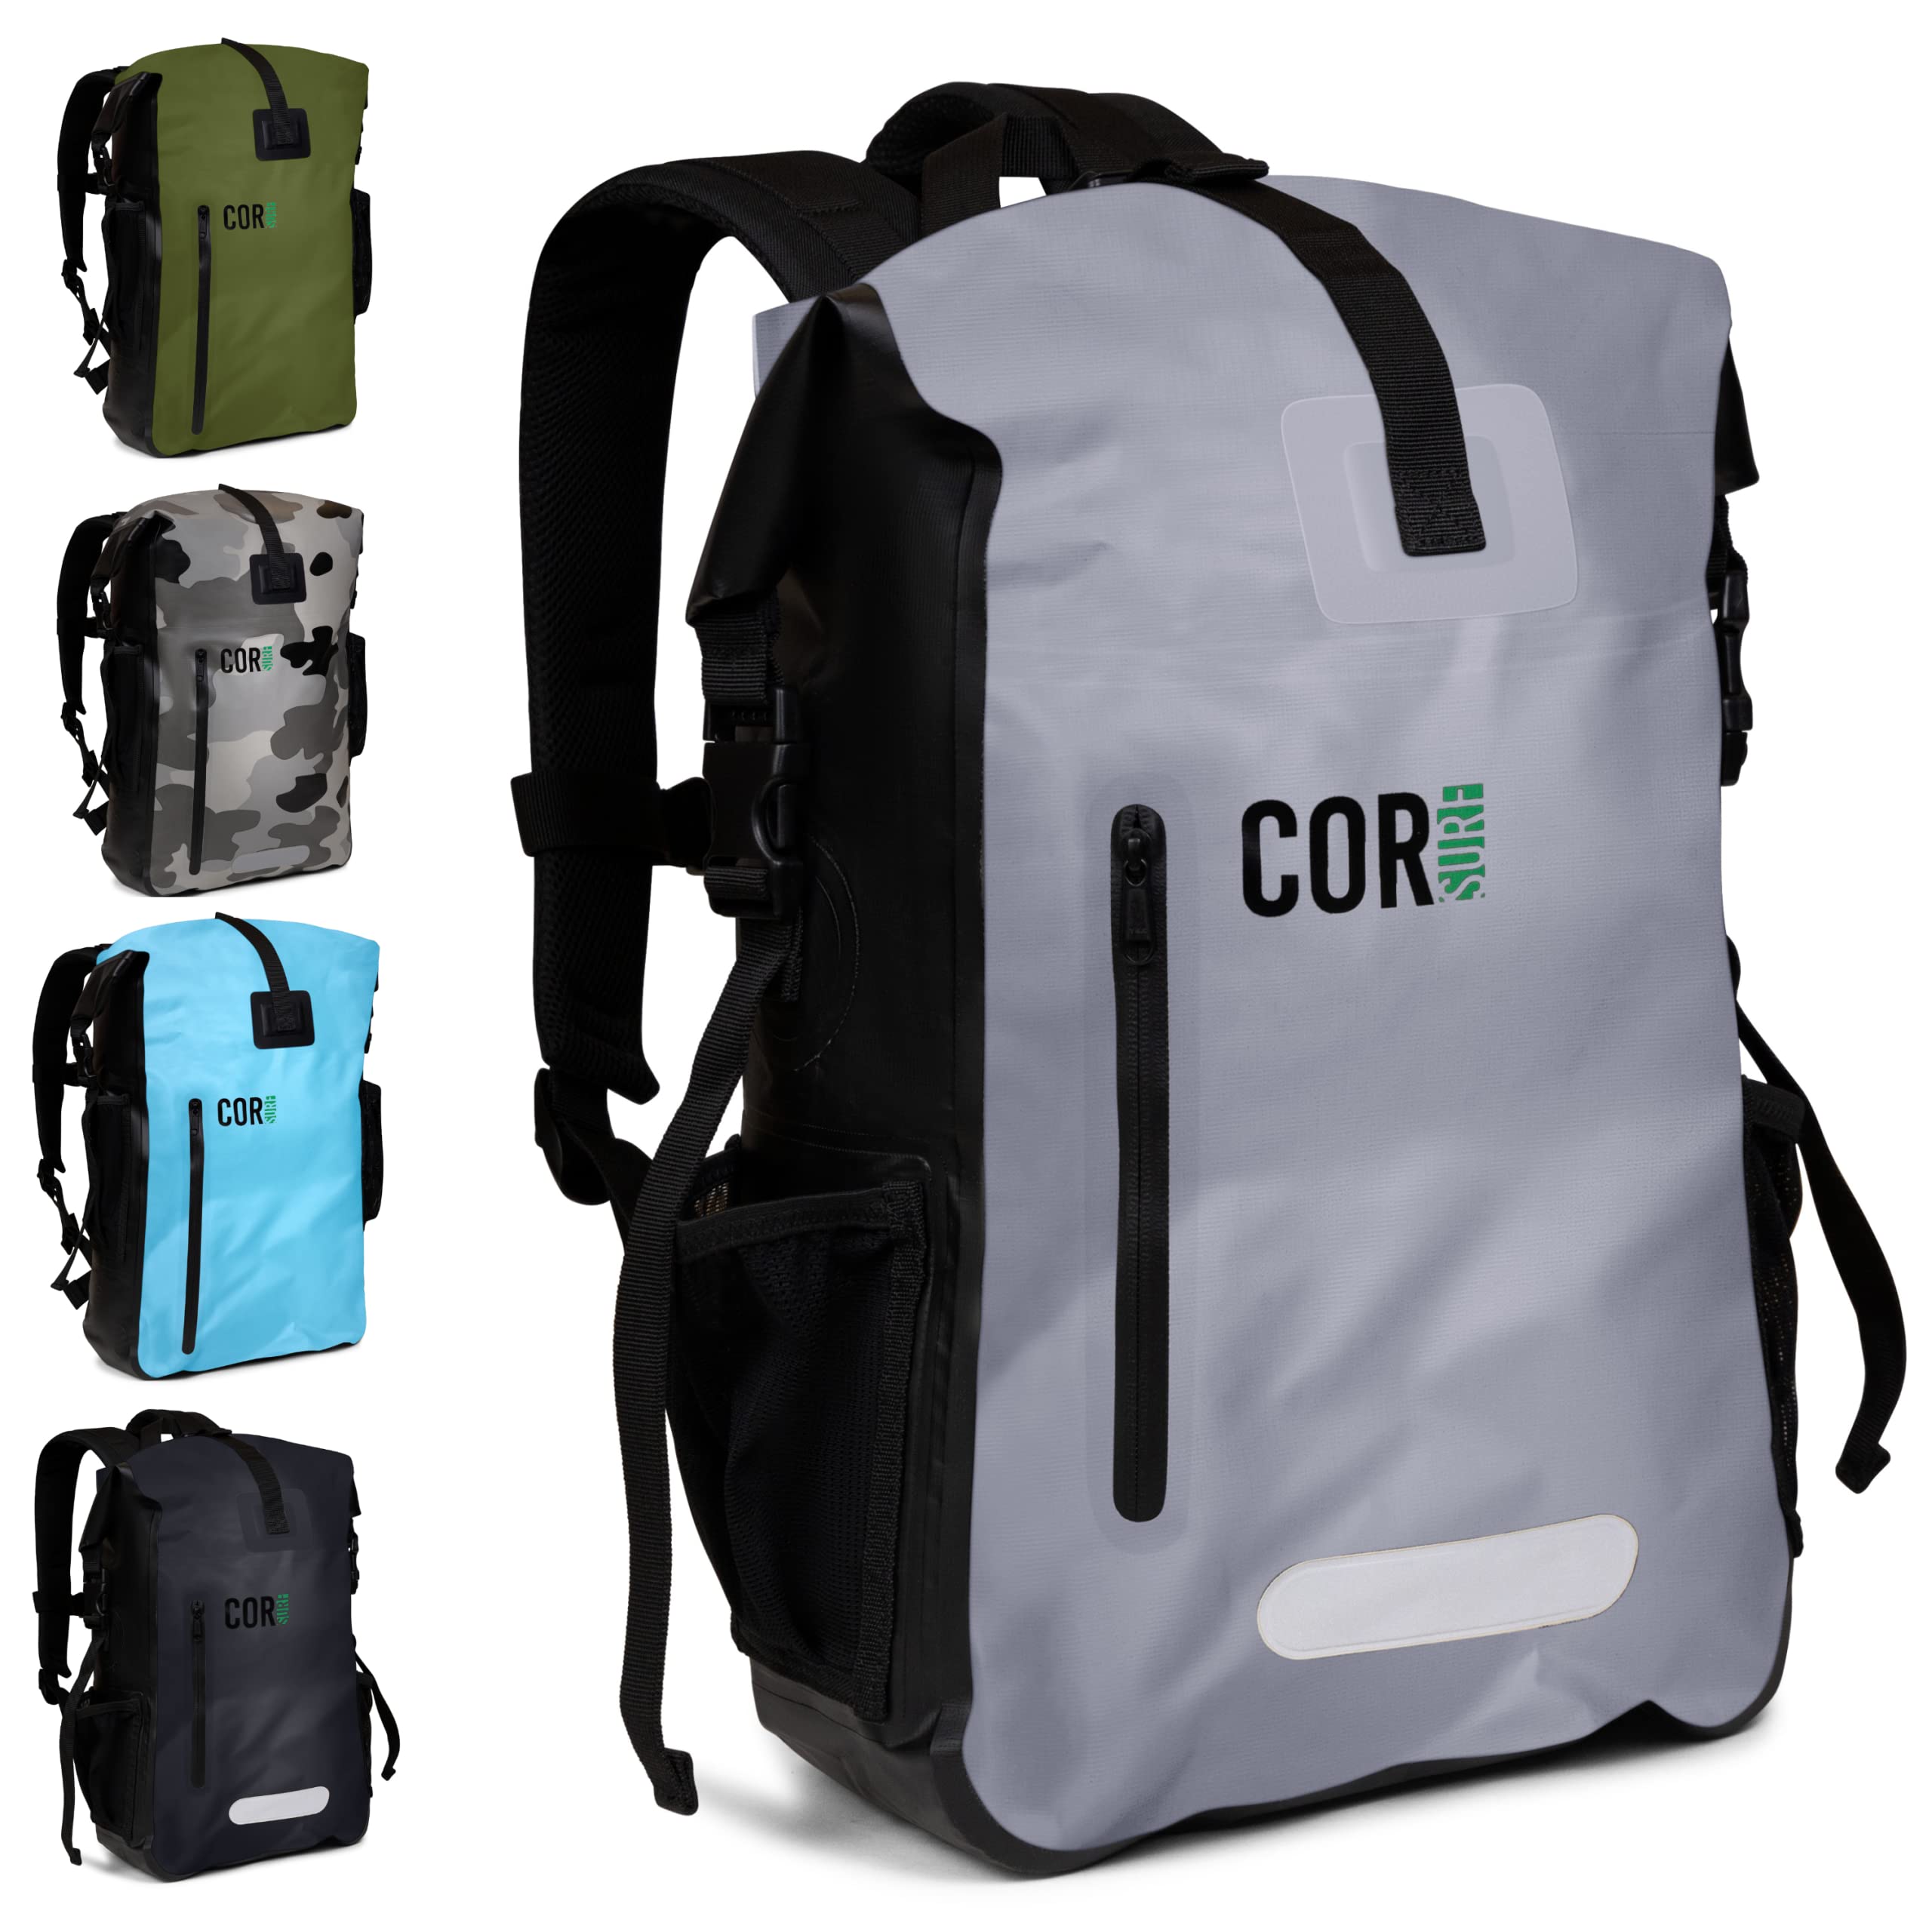 COR Surf 100% Waterproof Heavy Duty Backpack And Dry Backpack For Swimming, Boating Or Kayaking, Roll-top Design With Sonically 